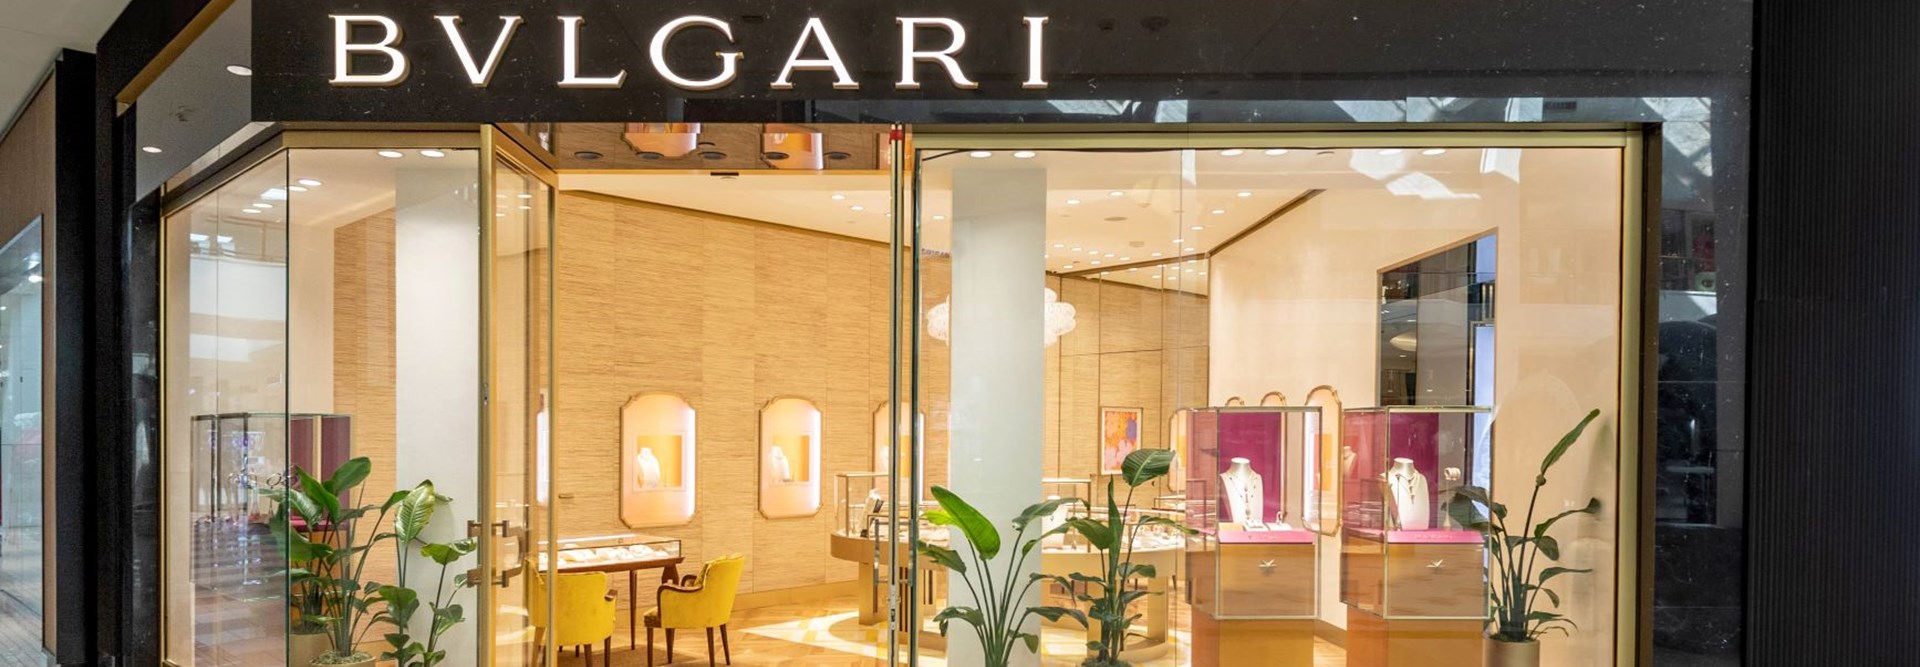 BVLGARI - Our brand partners - Group - The Watches of Switzerland Group